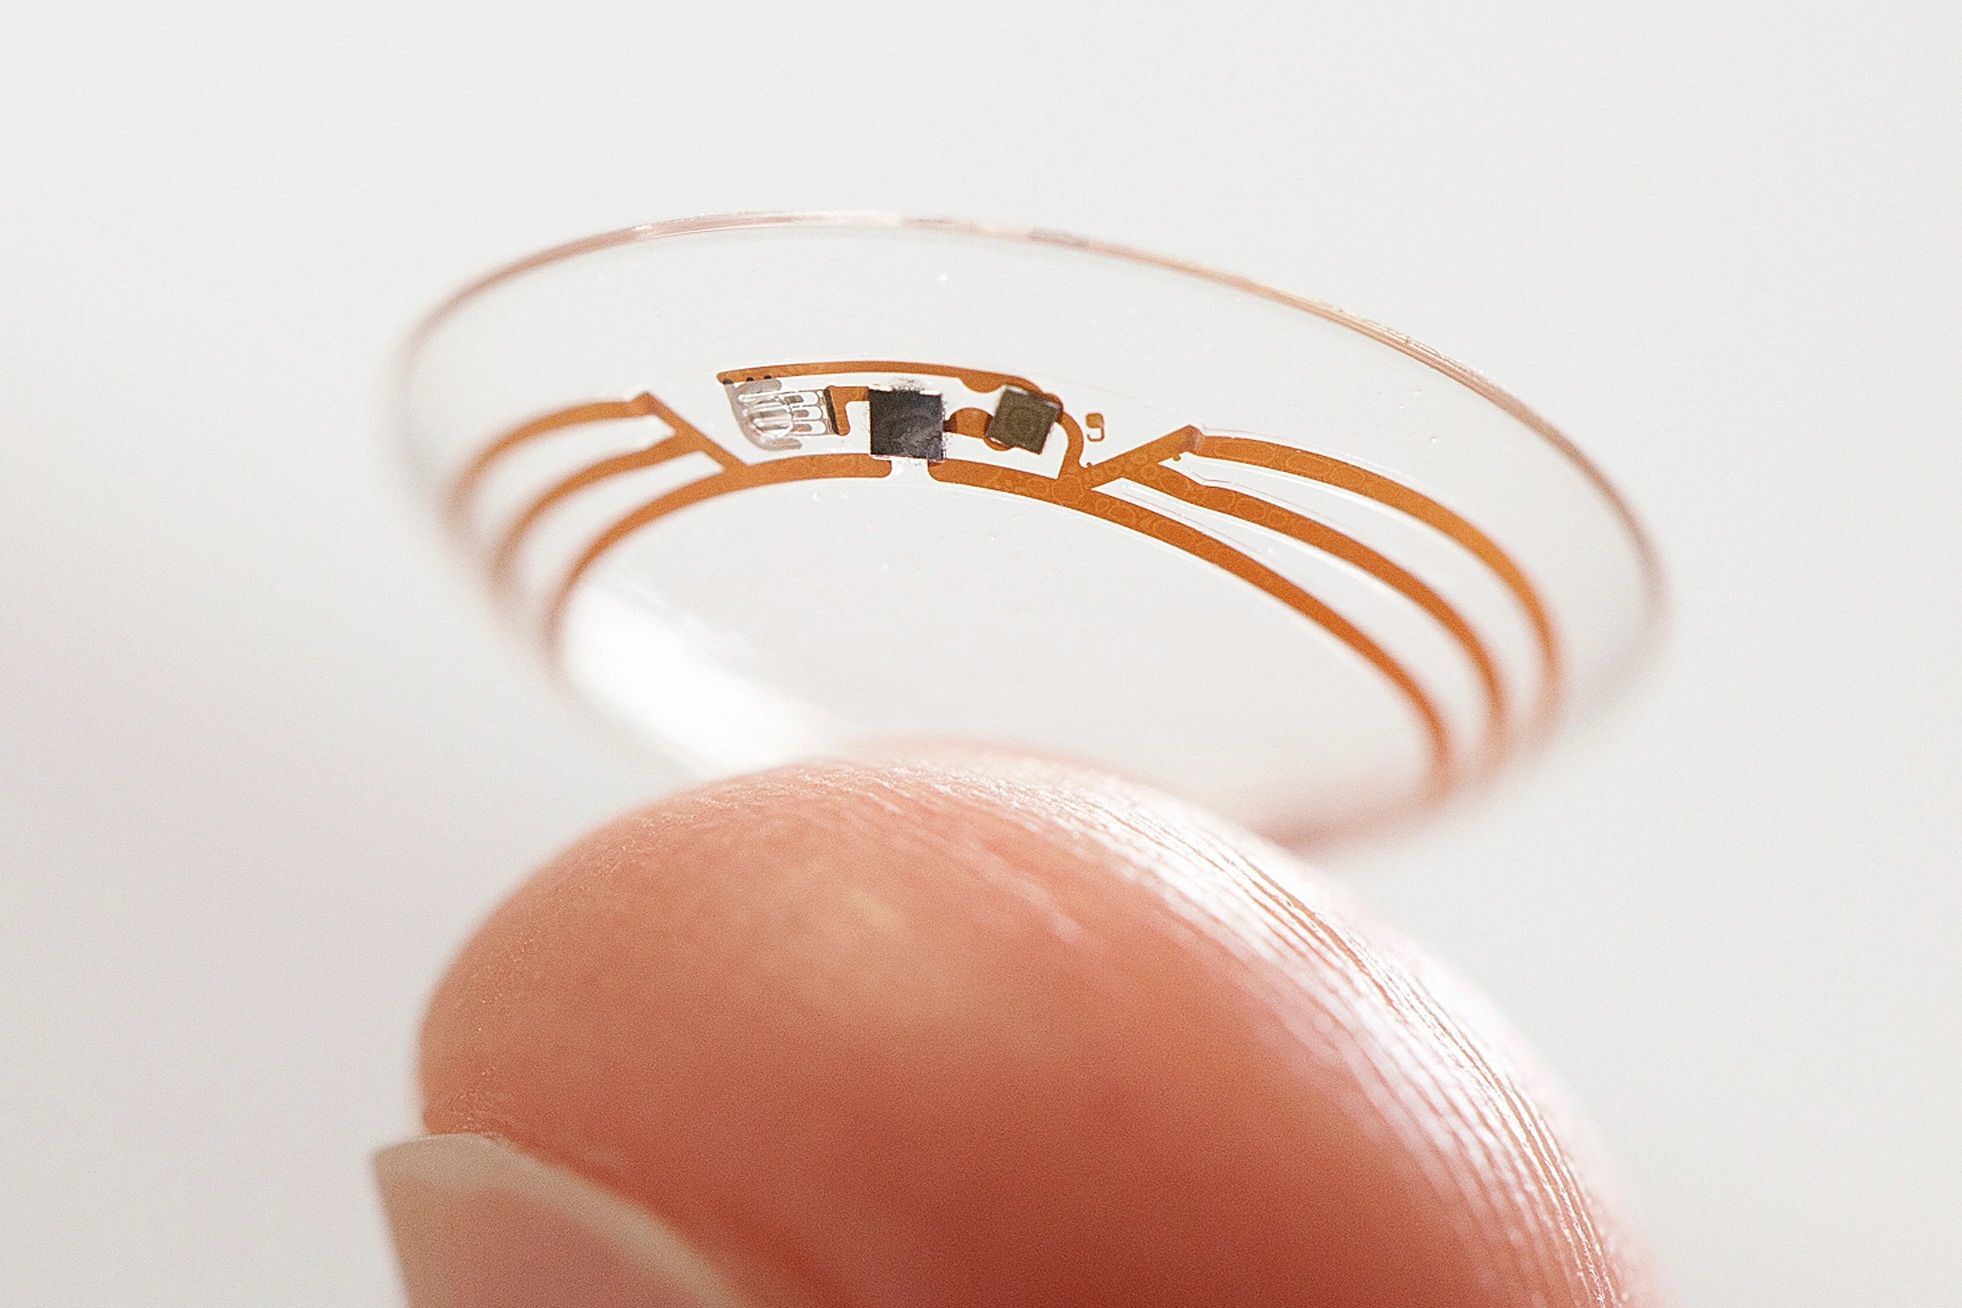 Smart contact lenses could arrive sooner than expected